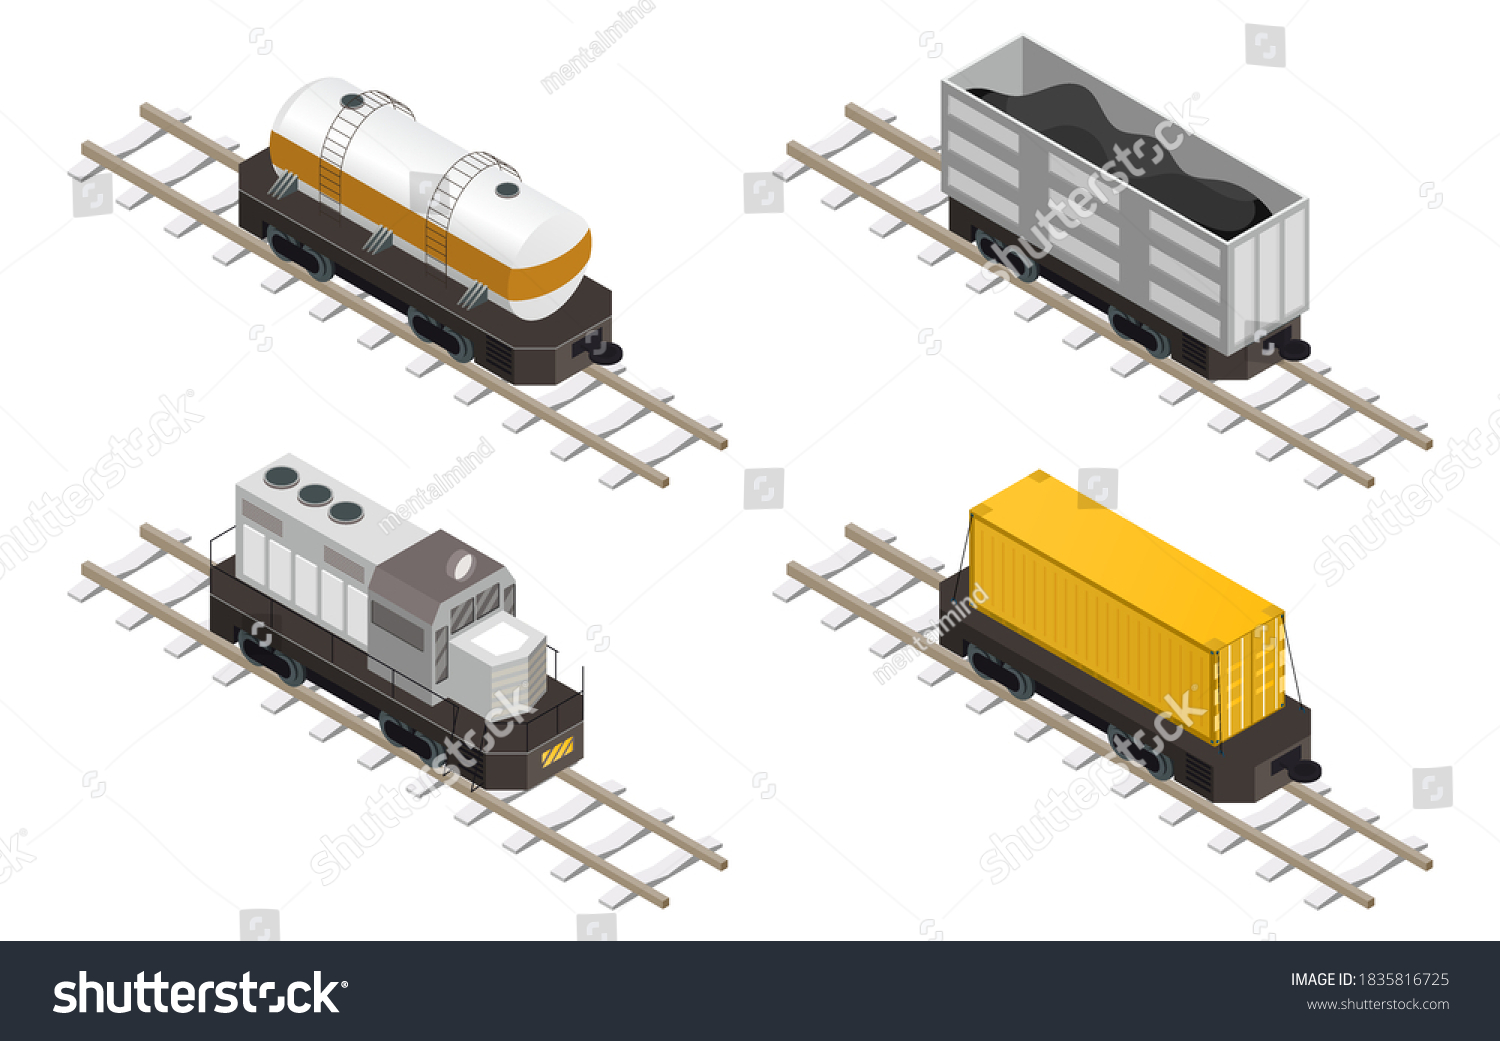 SVG of Vector isometric illustration depicting various types of freight wagons. 3d vector illustration with objects isolated on white. svg